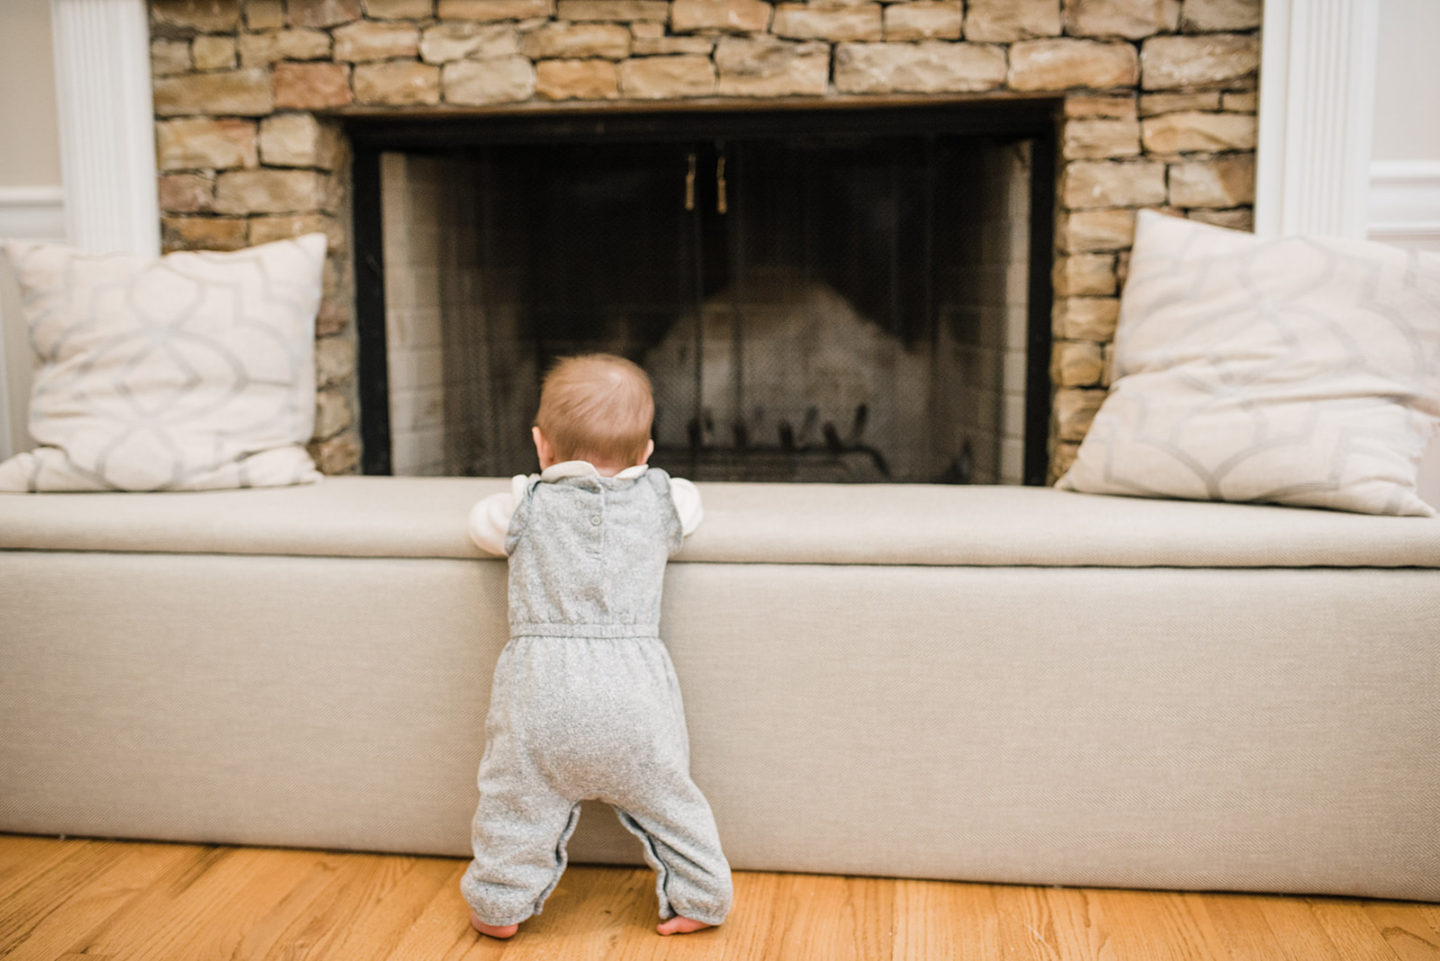 Before & After: A Stylish Babyproof Fireplace